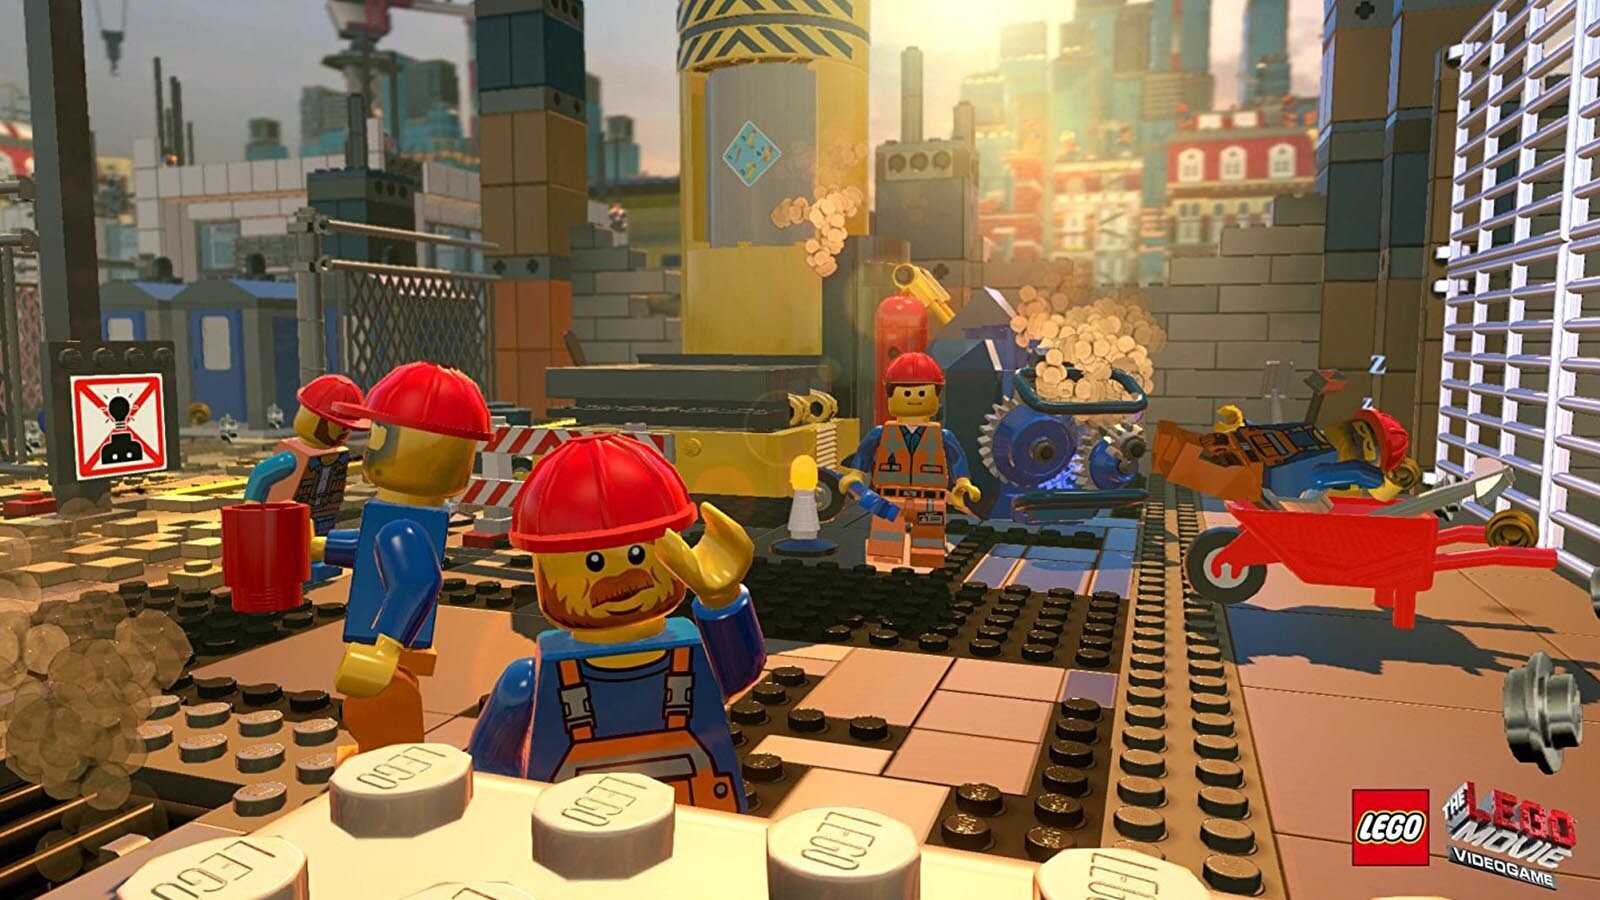 LEGO Harry Potter: Years 5-7 Preview - What's New In The Next LEGO Game? -  Game Informer